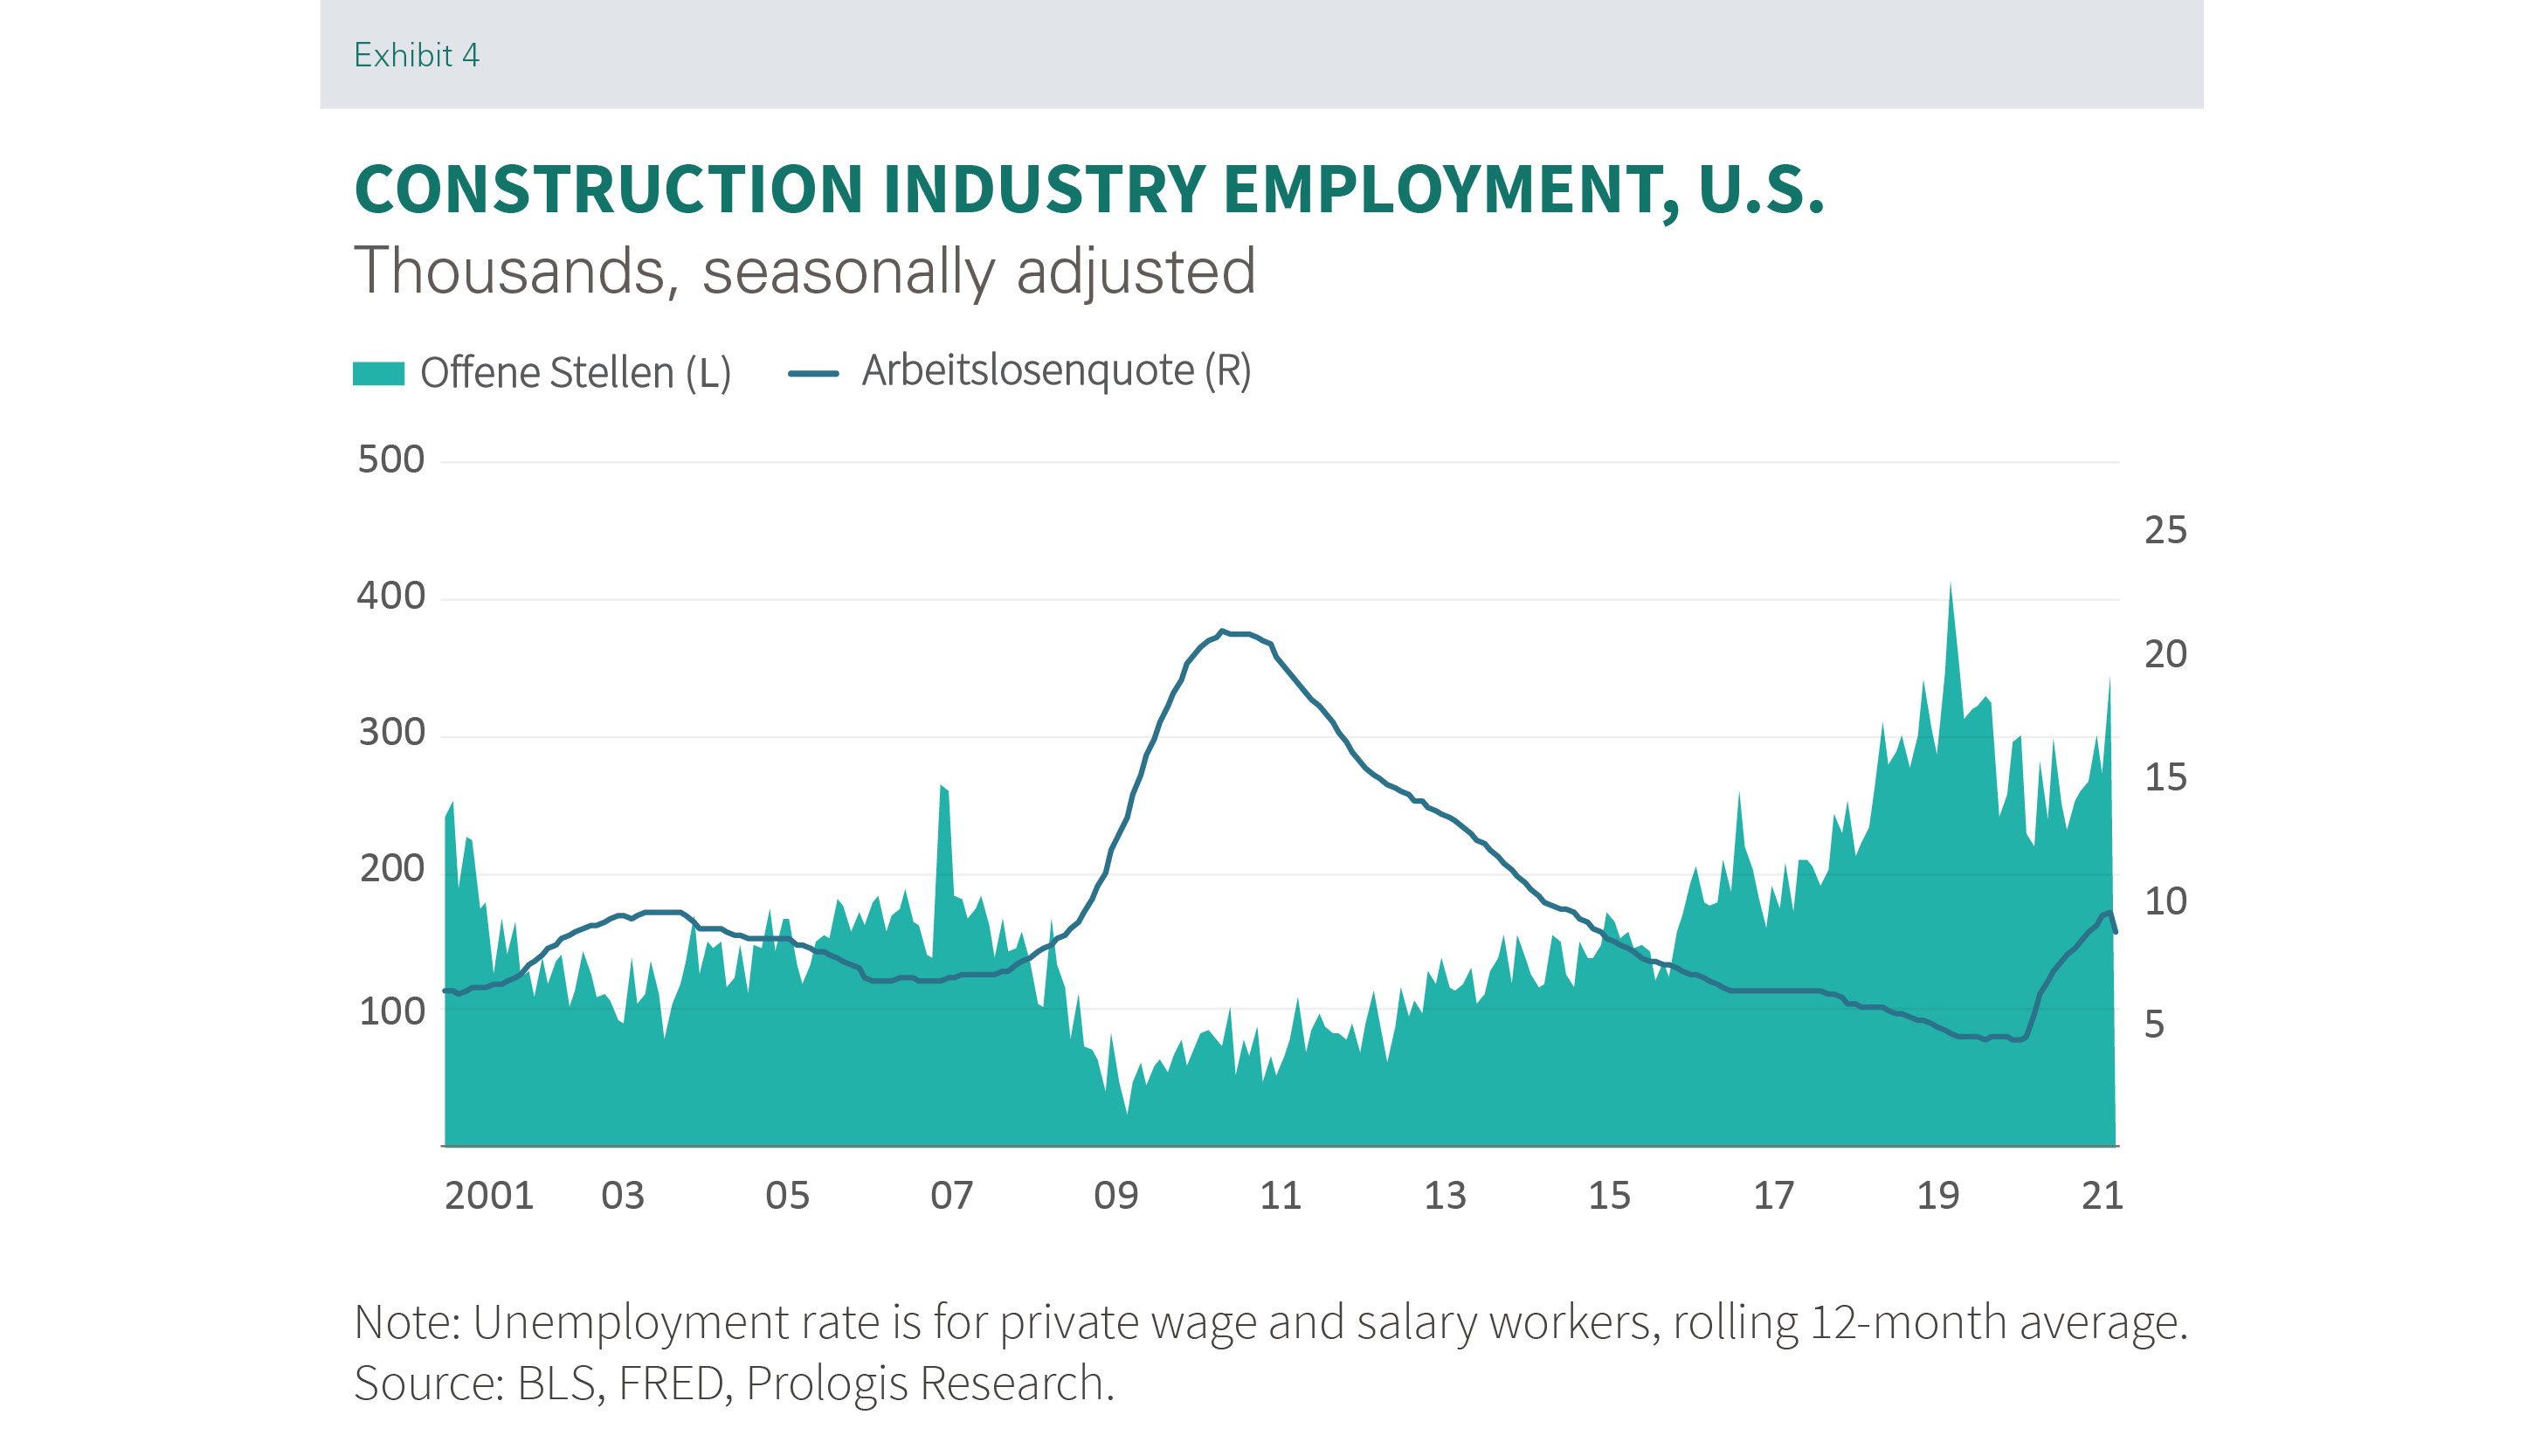 Prologis Research_Paper_Construction industry employment_US